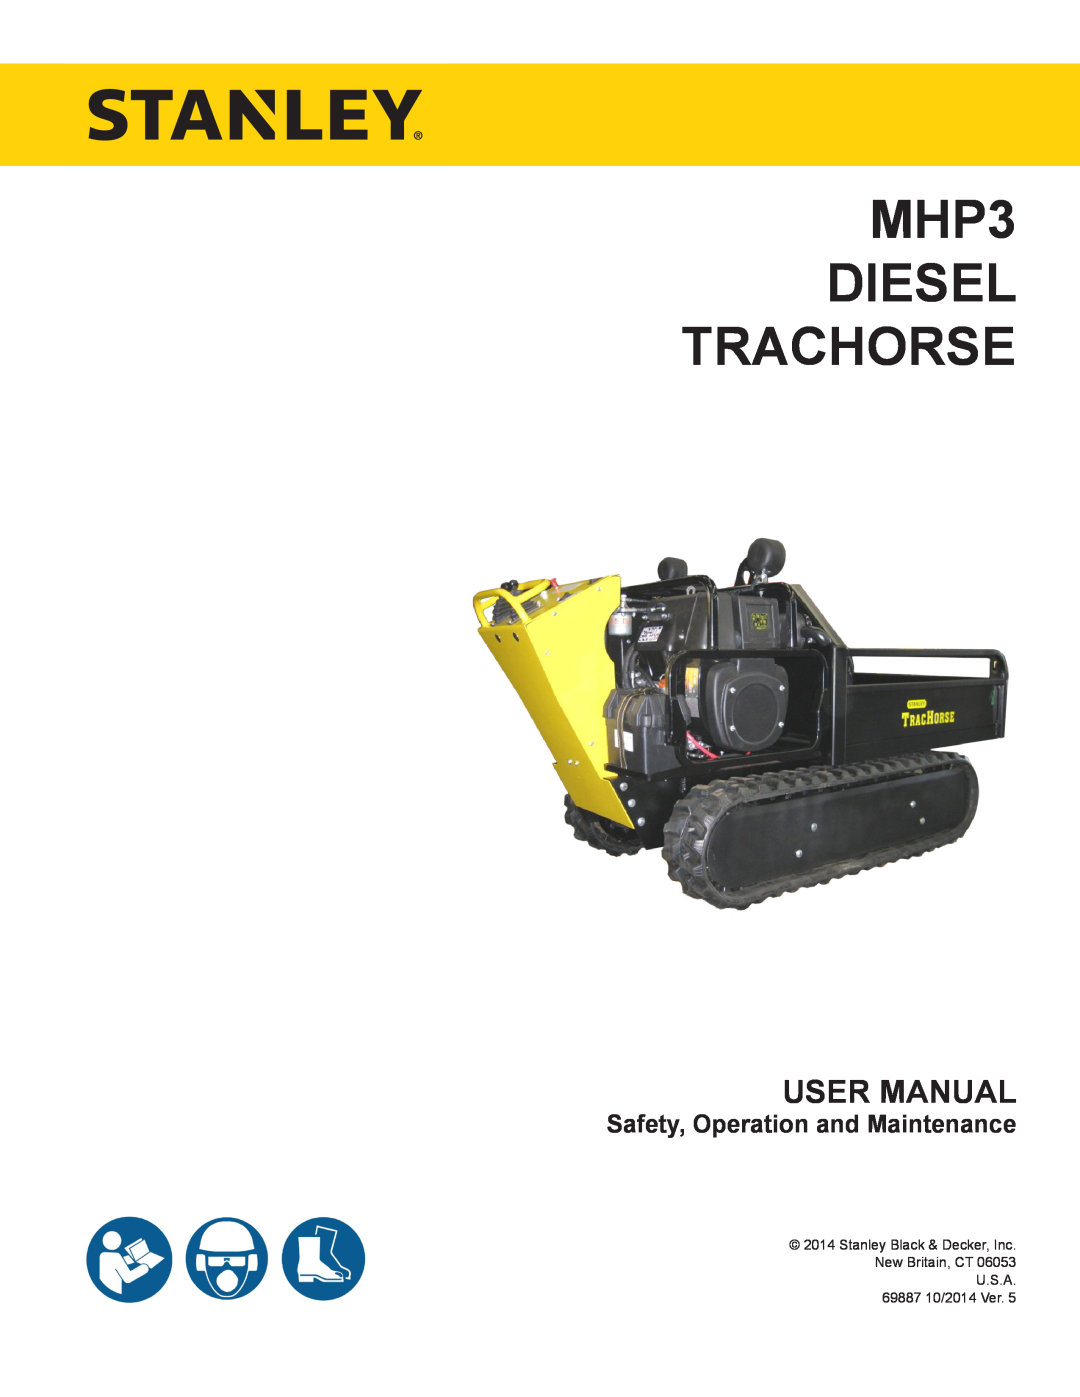 Stanley Black & Decker manual Safety, Operation and Maintenance, MHP3 DIESEL TRACHORSE 